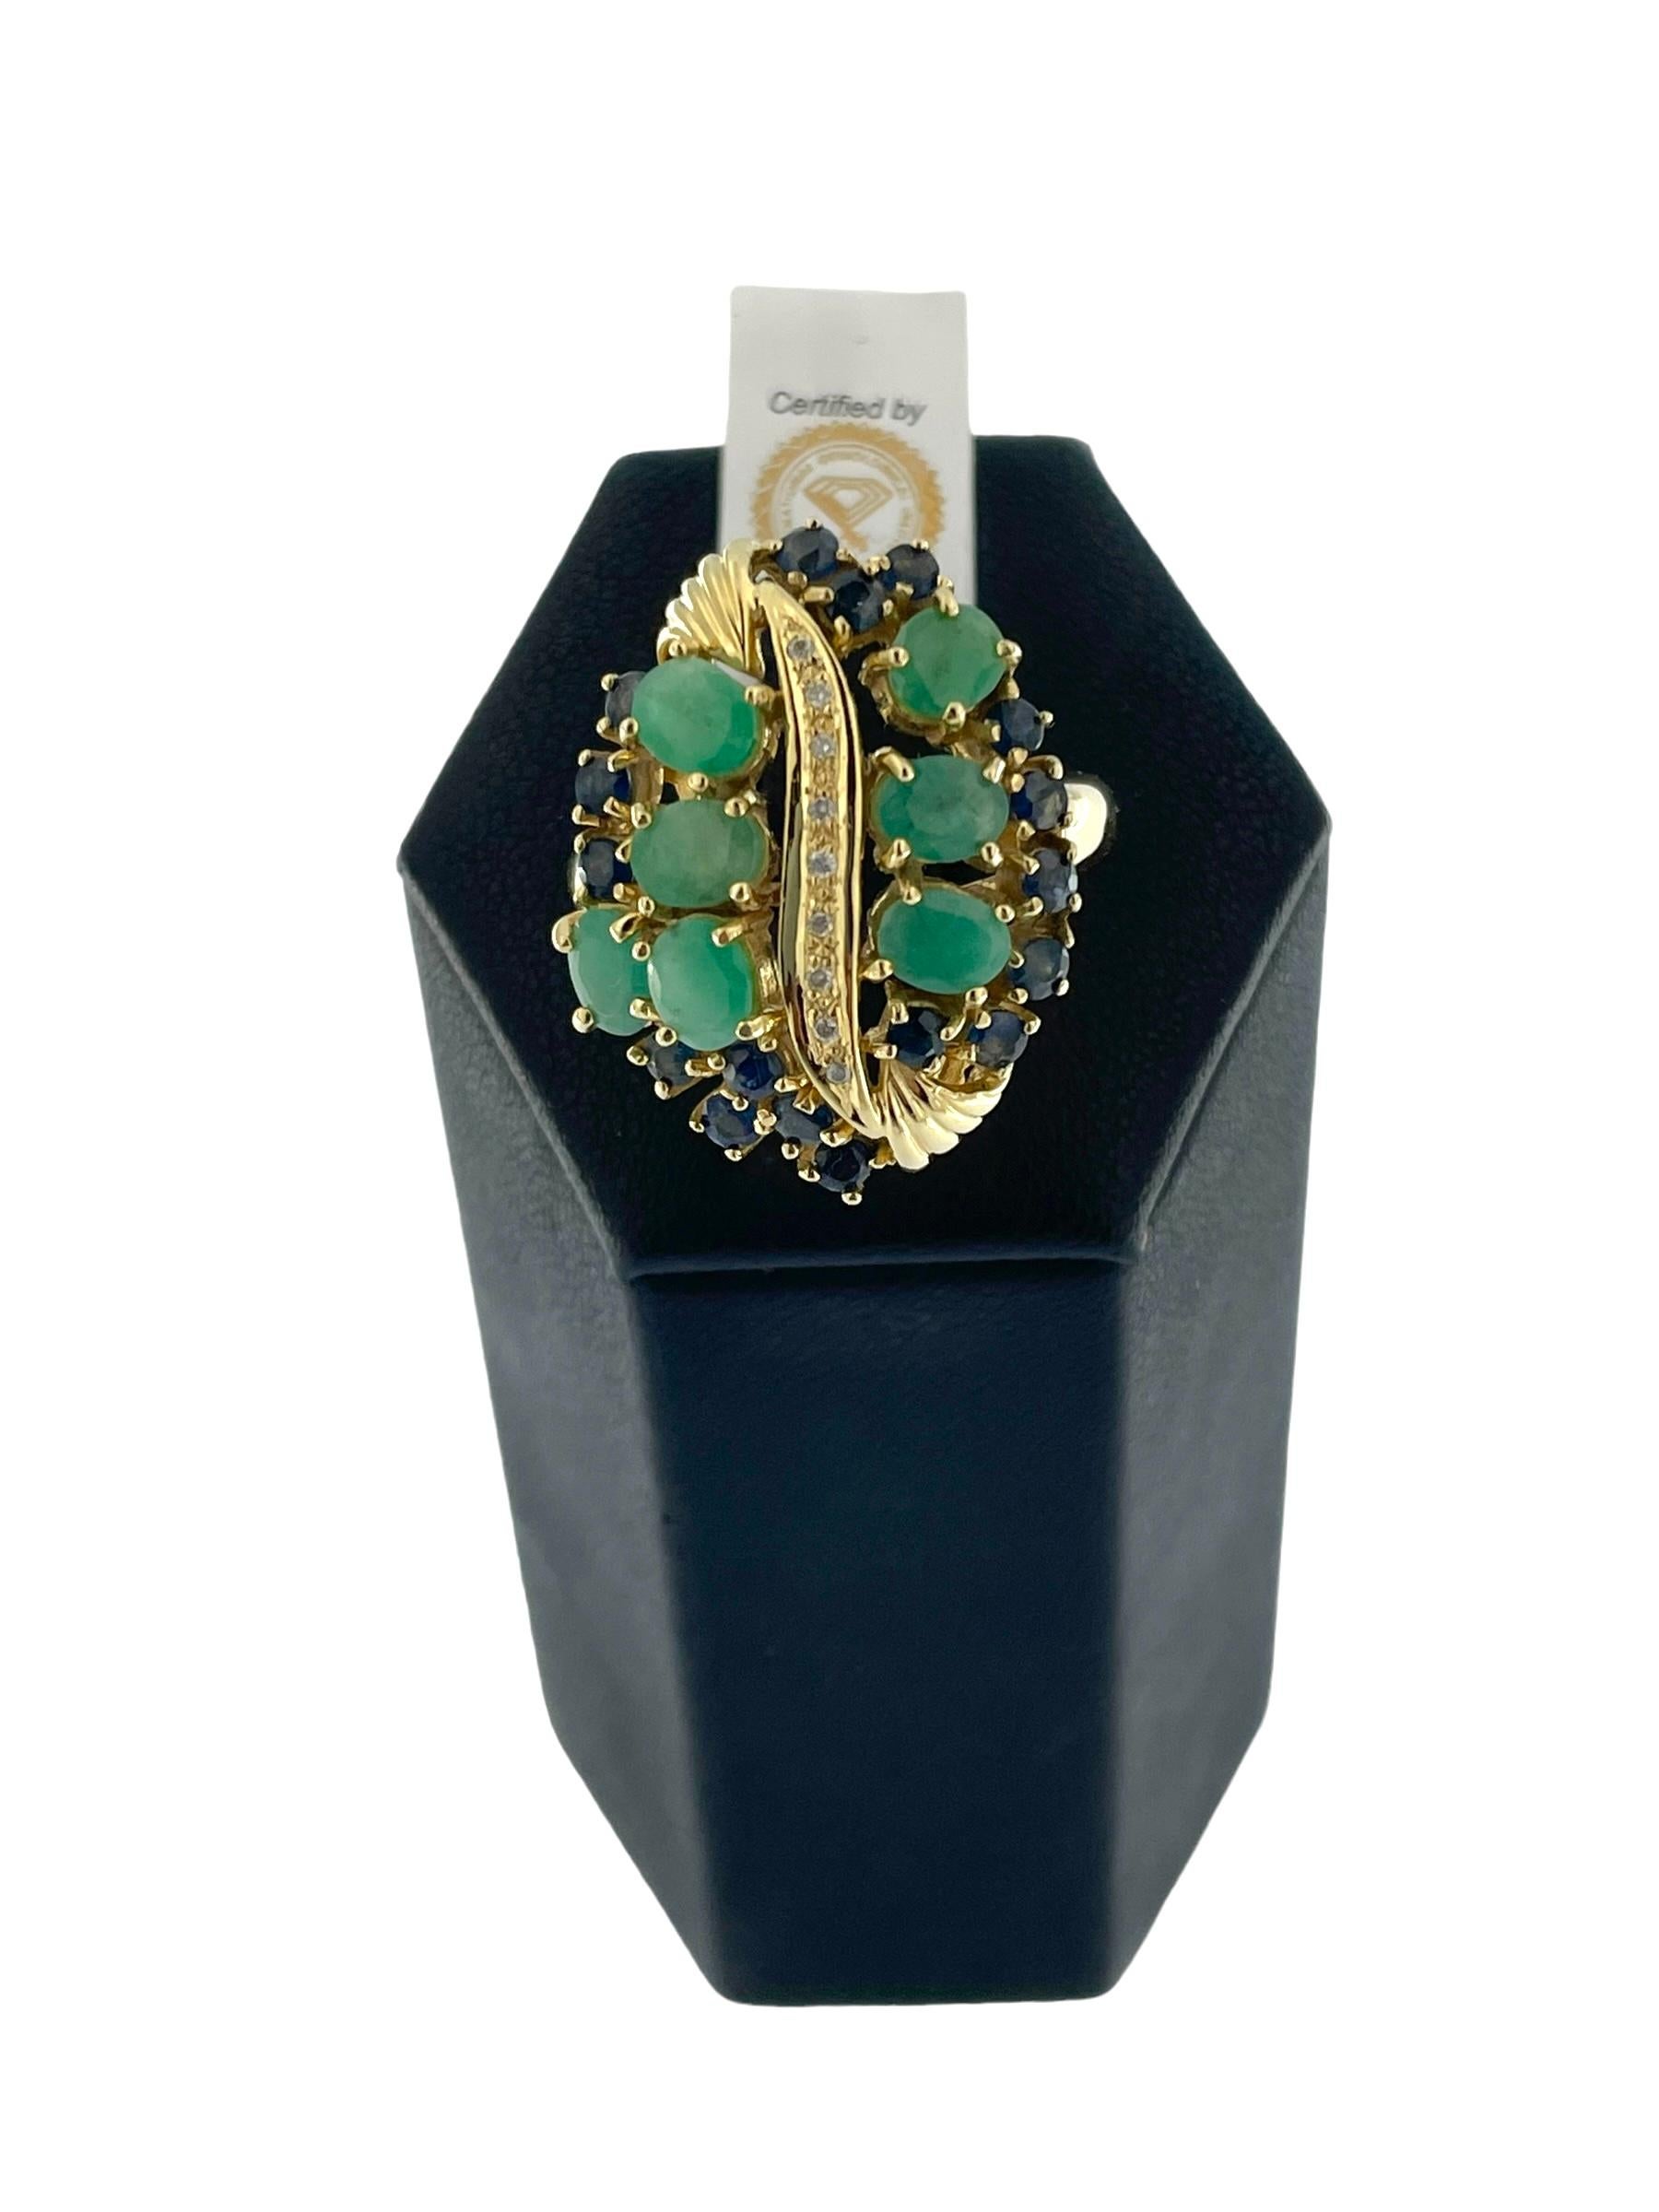 This IGI Certified Yellow Gold Cocktail Ring is a dazzling and luxurious piece of jewelry that combines the timeless beauty of diamonds, sapphires, and emeralds. Crafted in 18kt yellow gold, this ring showcases a perfect blend of retro design with a